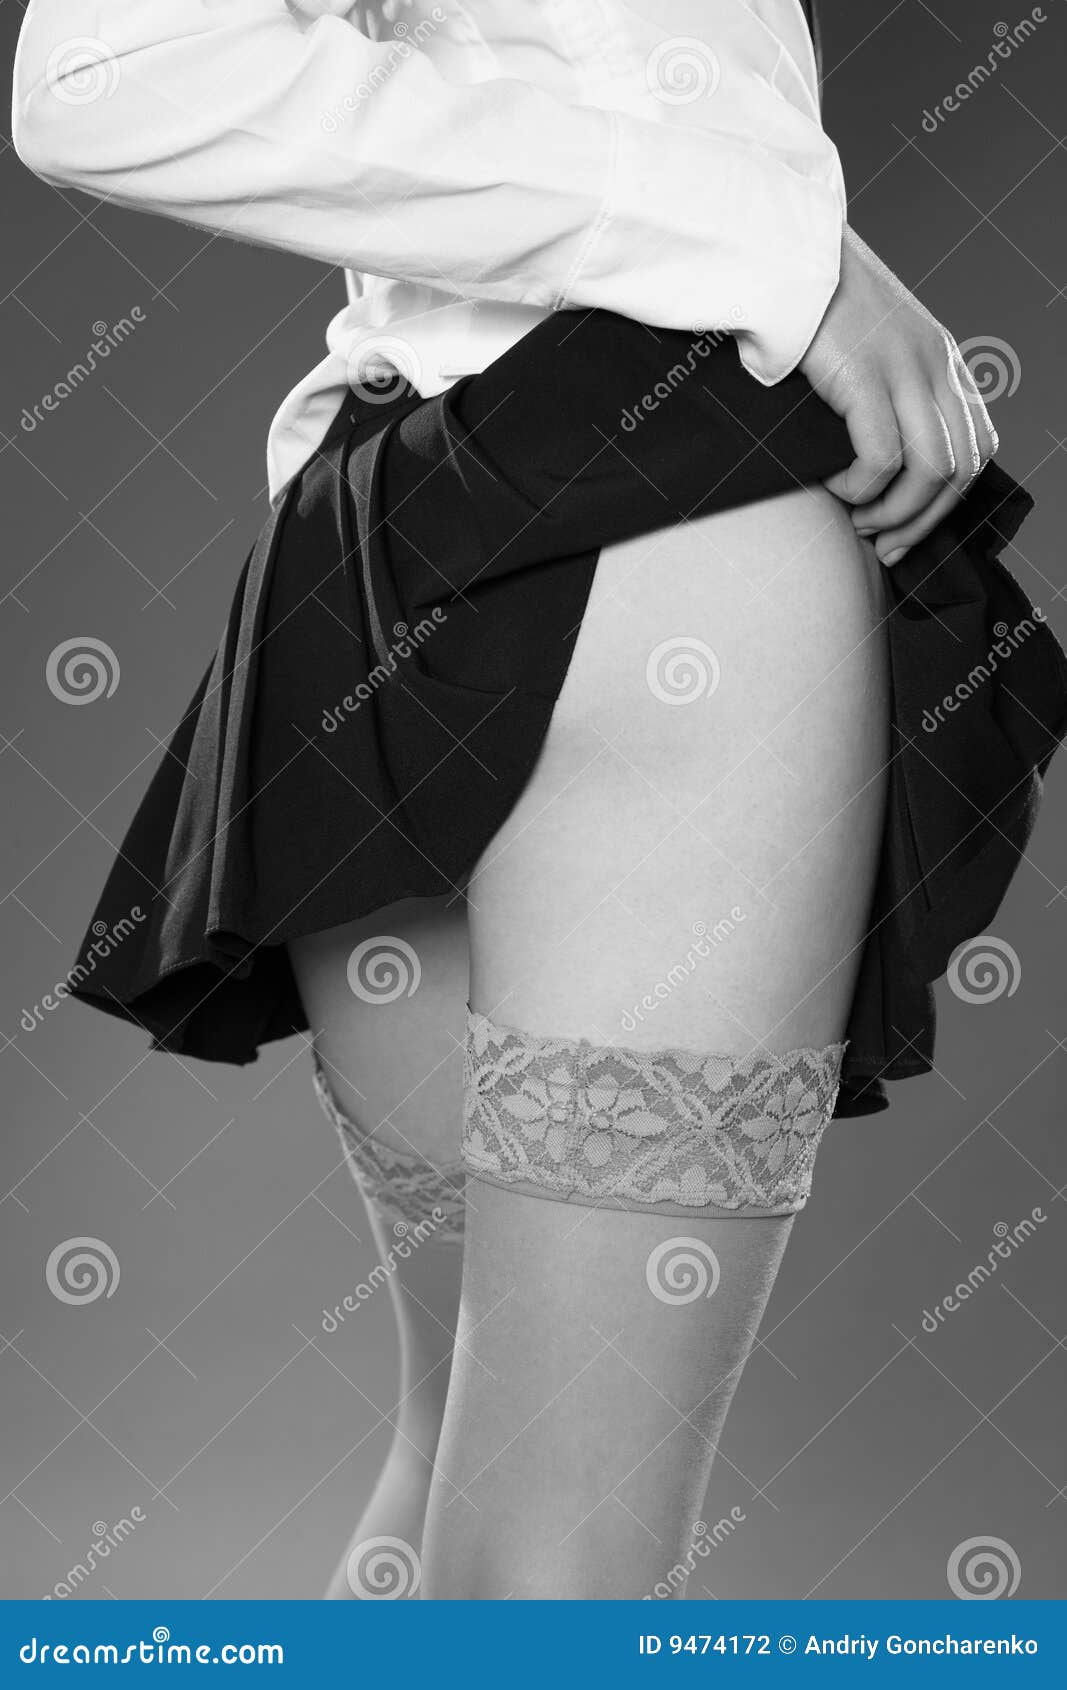 girl has lifted up a skirt